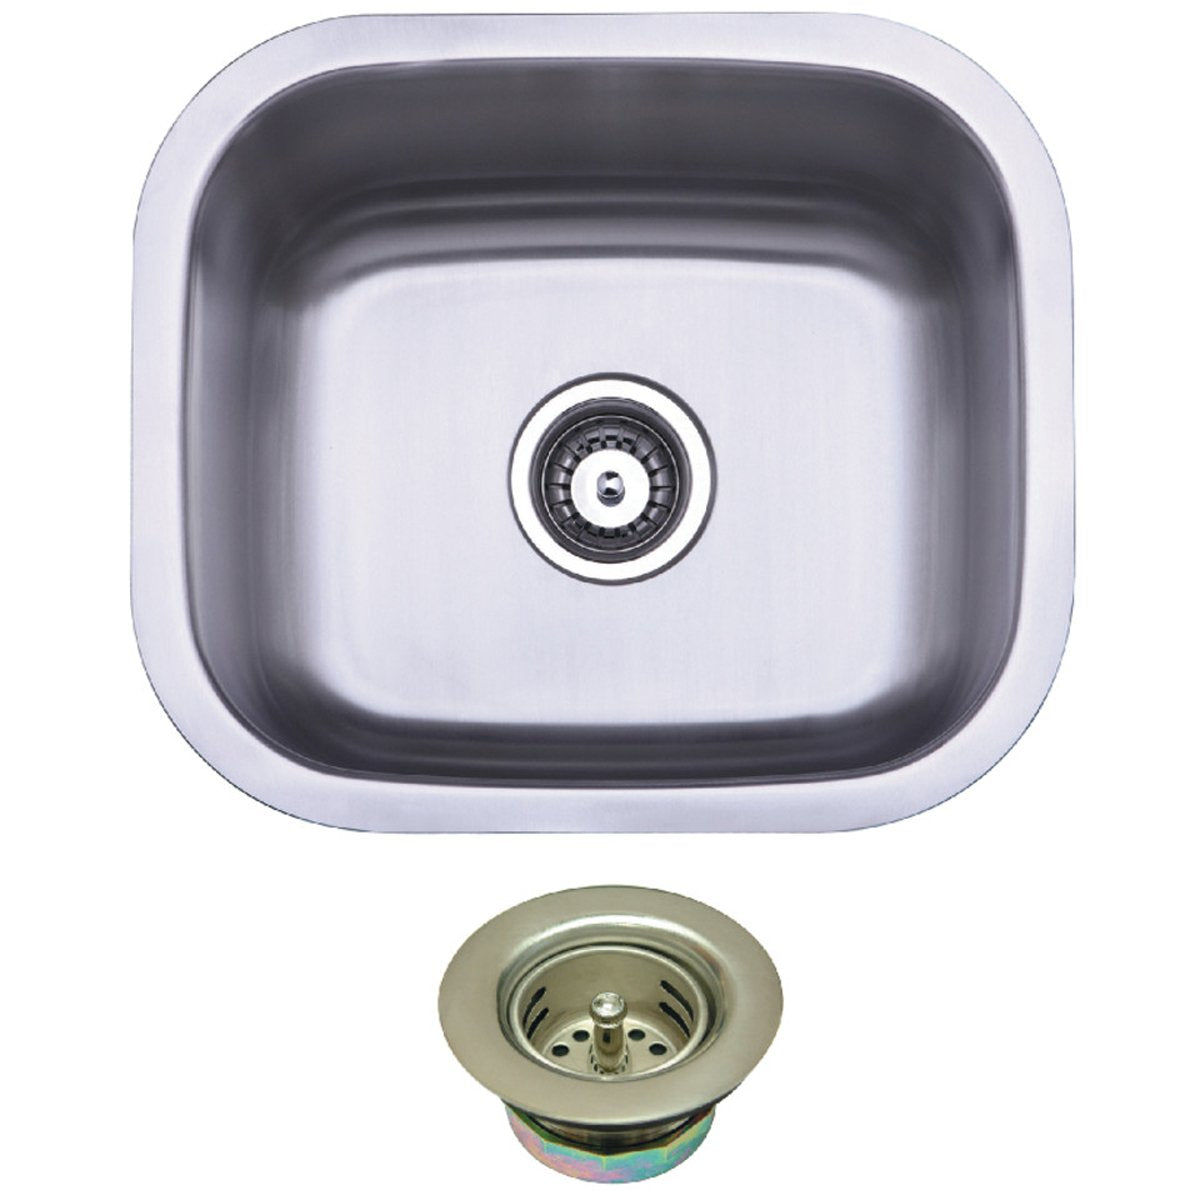 Kingston Brass Undermount Stainless Steel Single Bowl Bar Sink Combo with Strainer